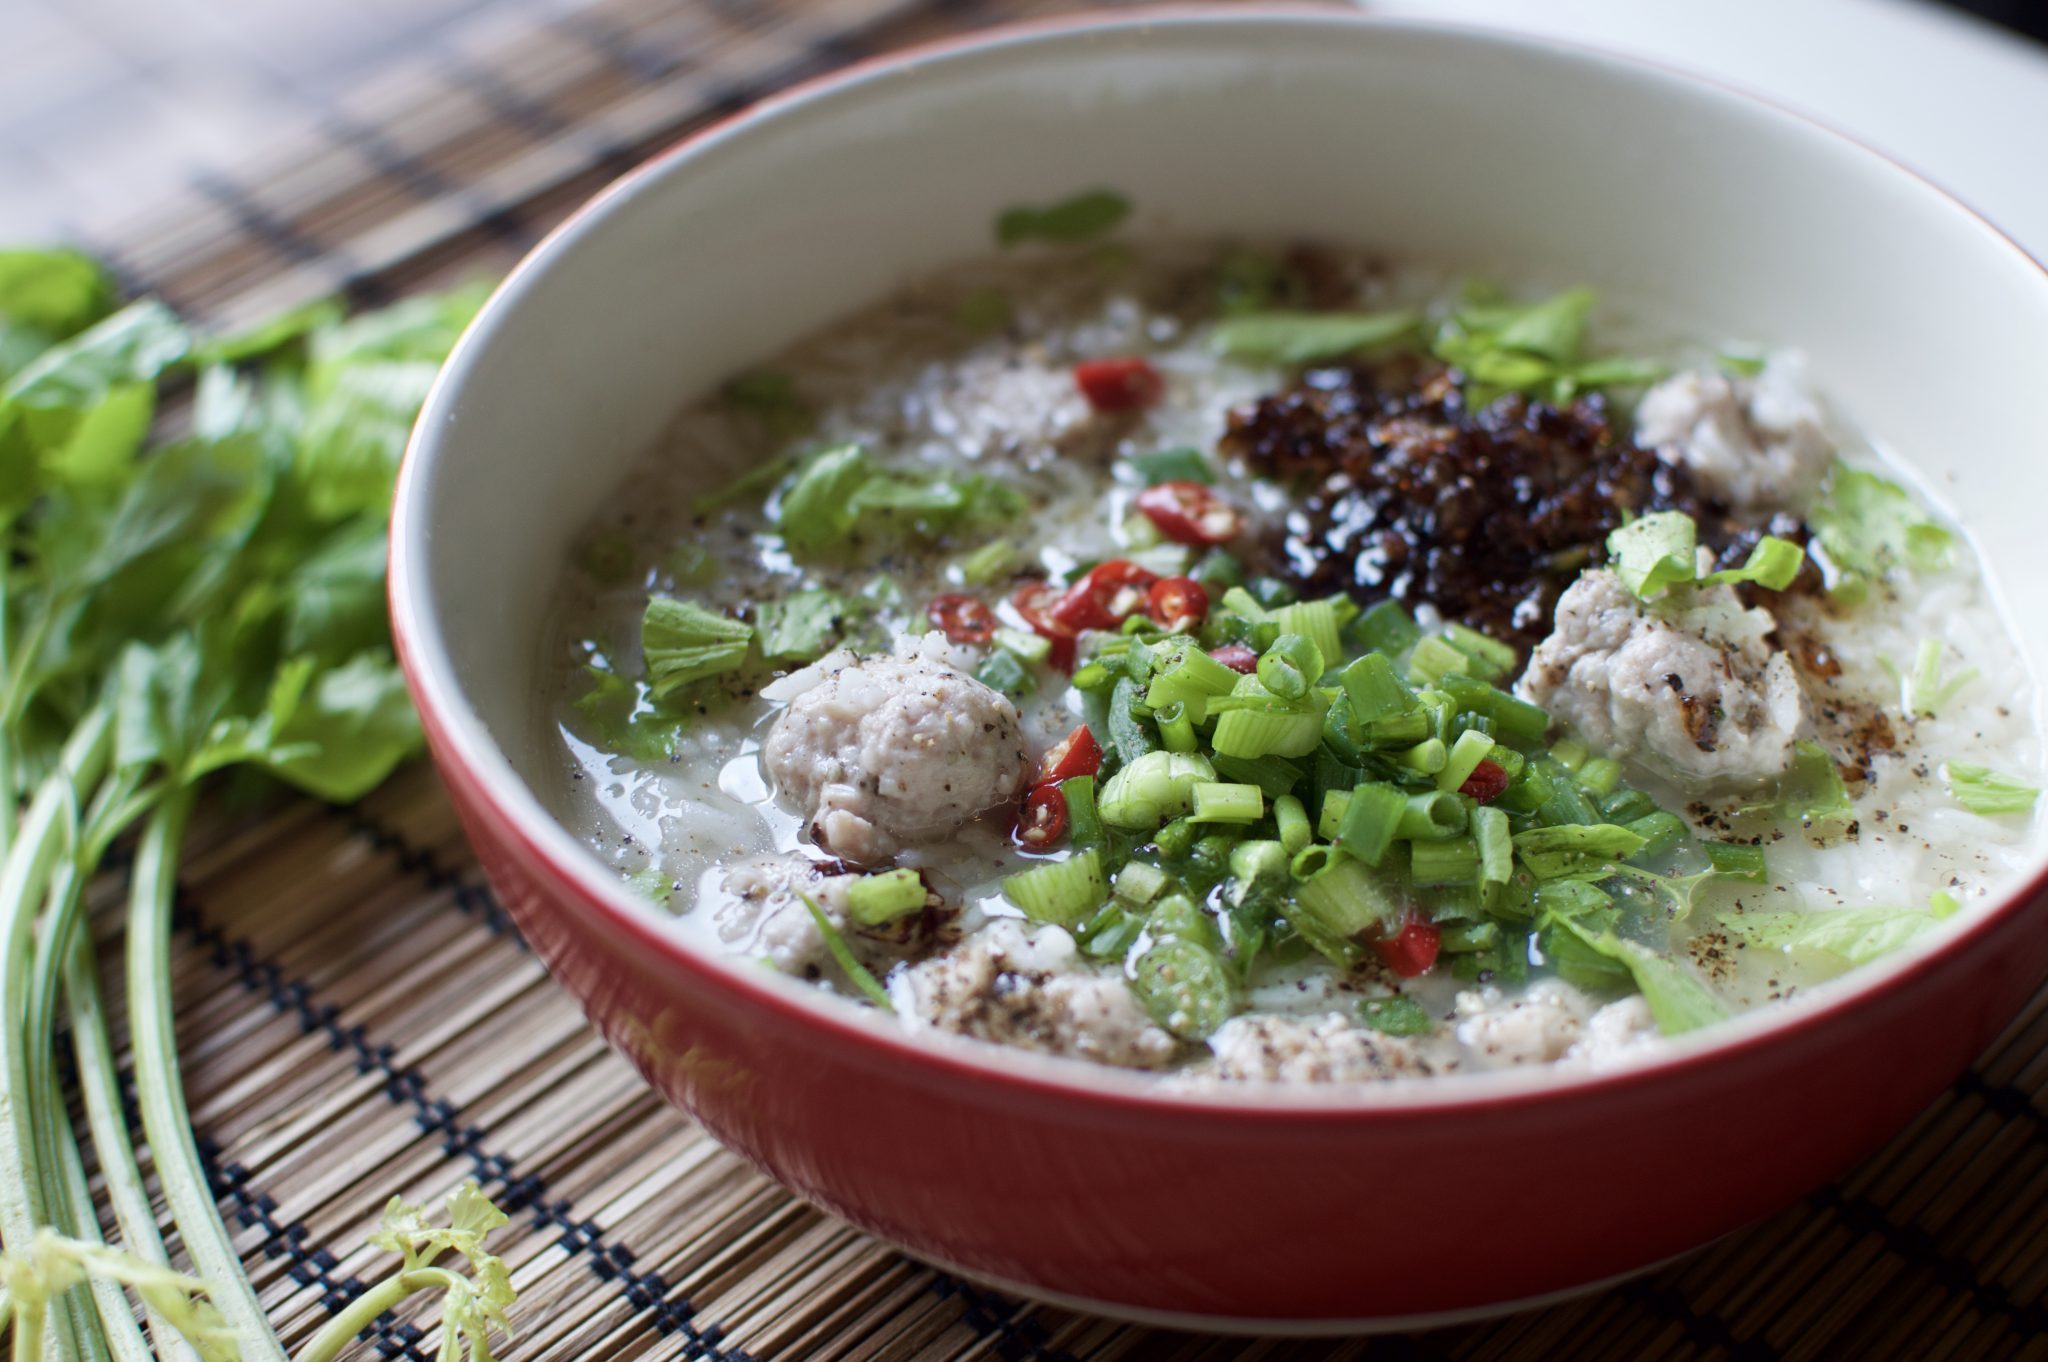 Khao Tom - Typical foods for a local breakfast in Thailand